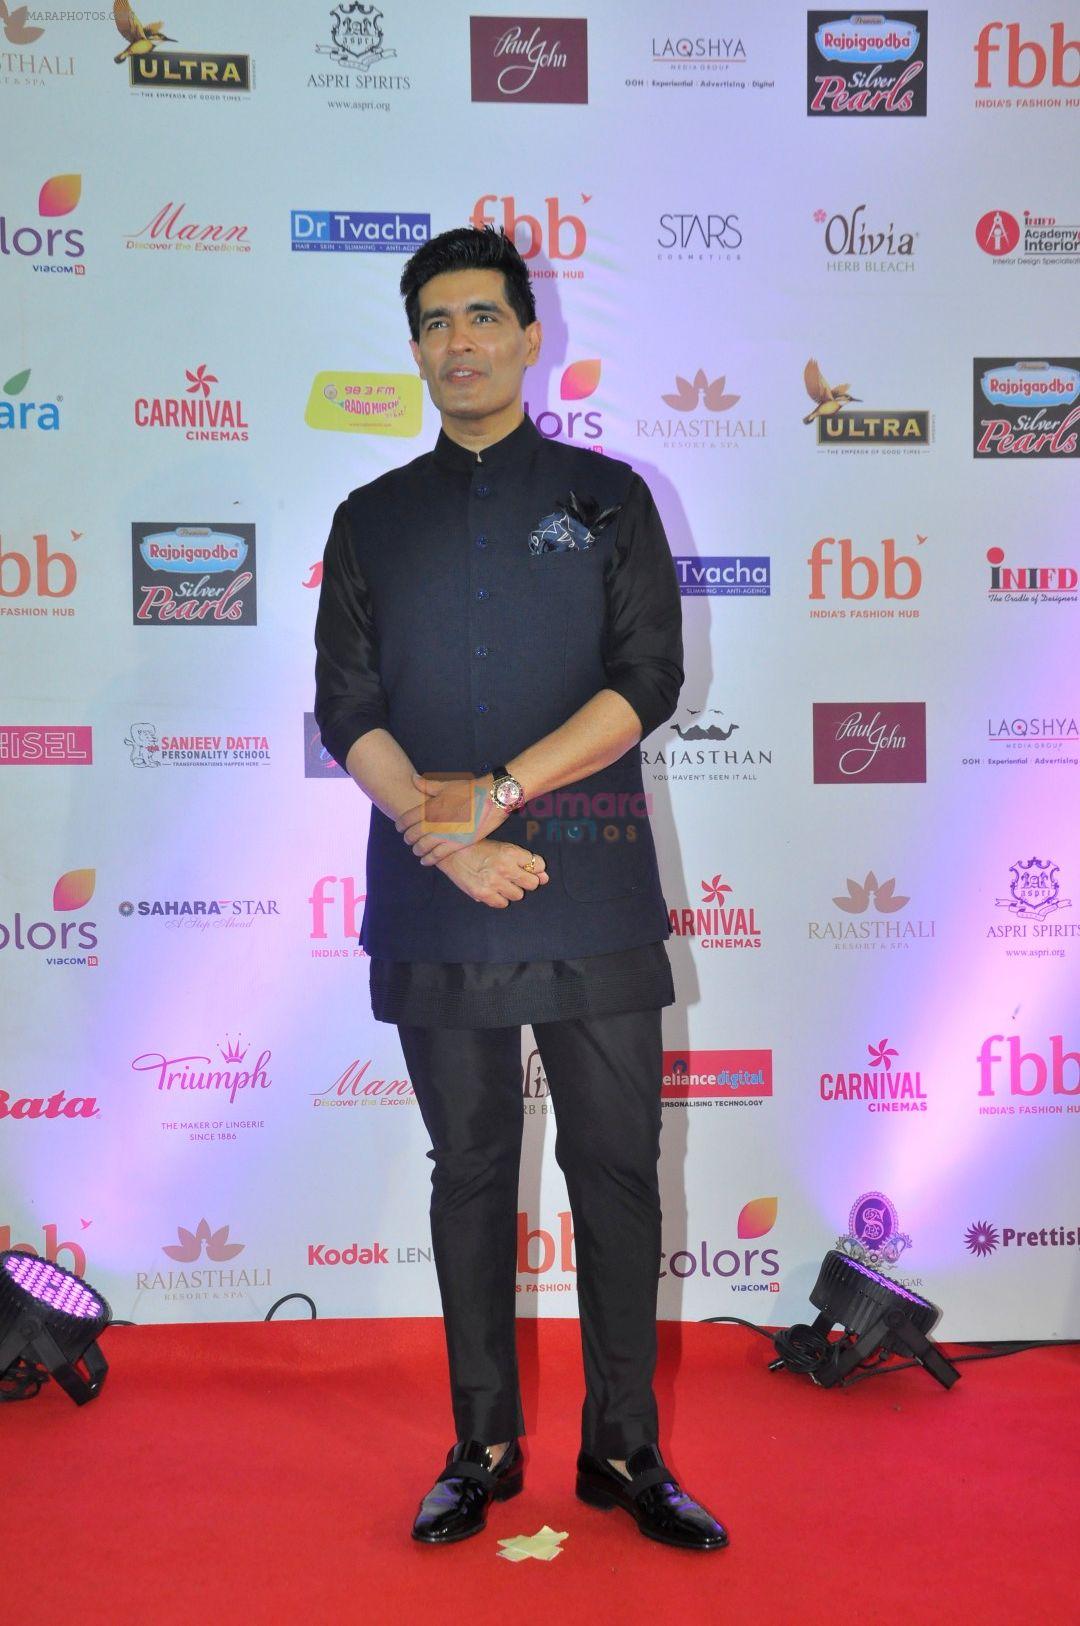 Manish Malhotra during Miss India Grand Finale Red Carpet on 24th June 2017